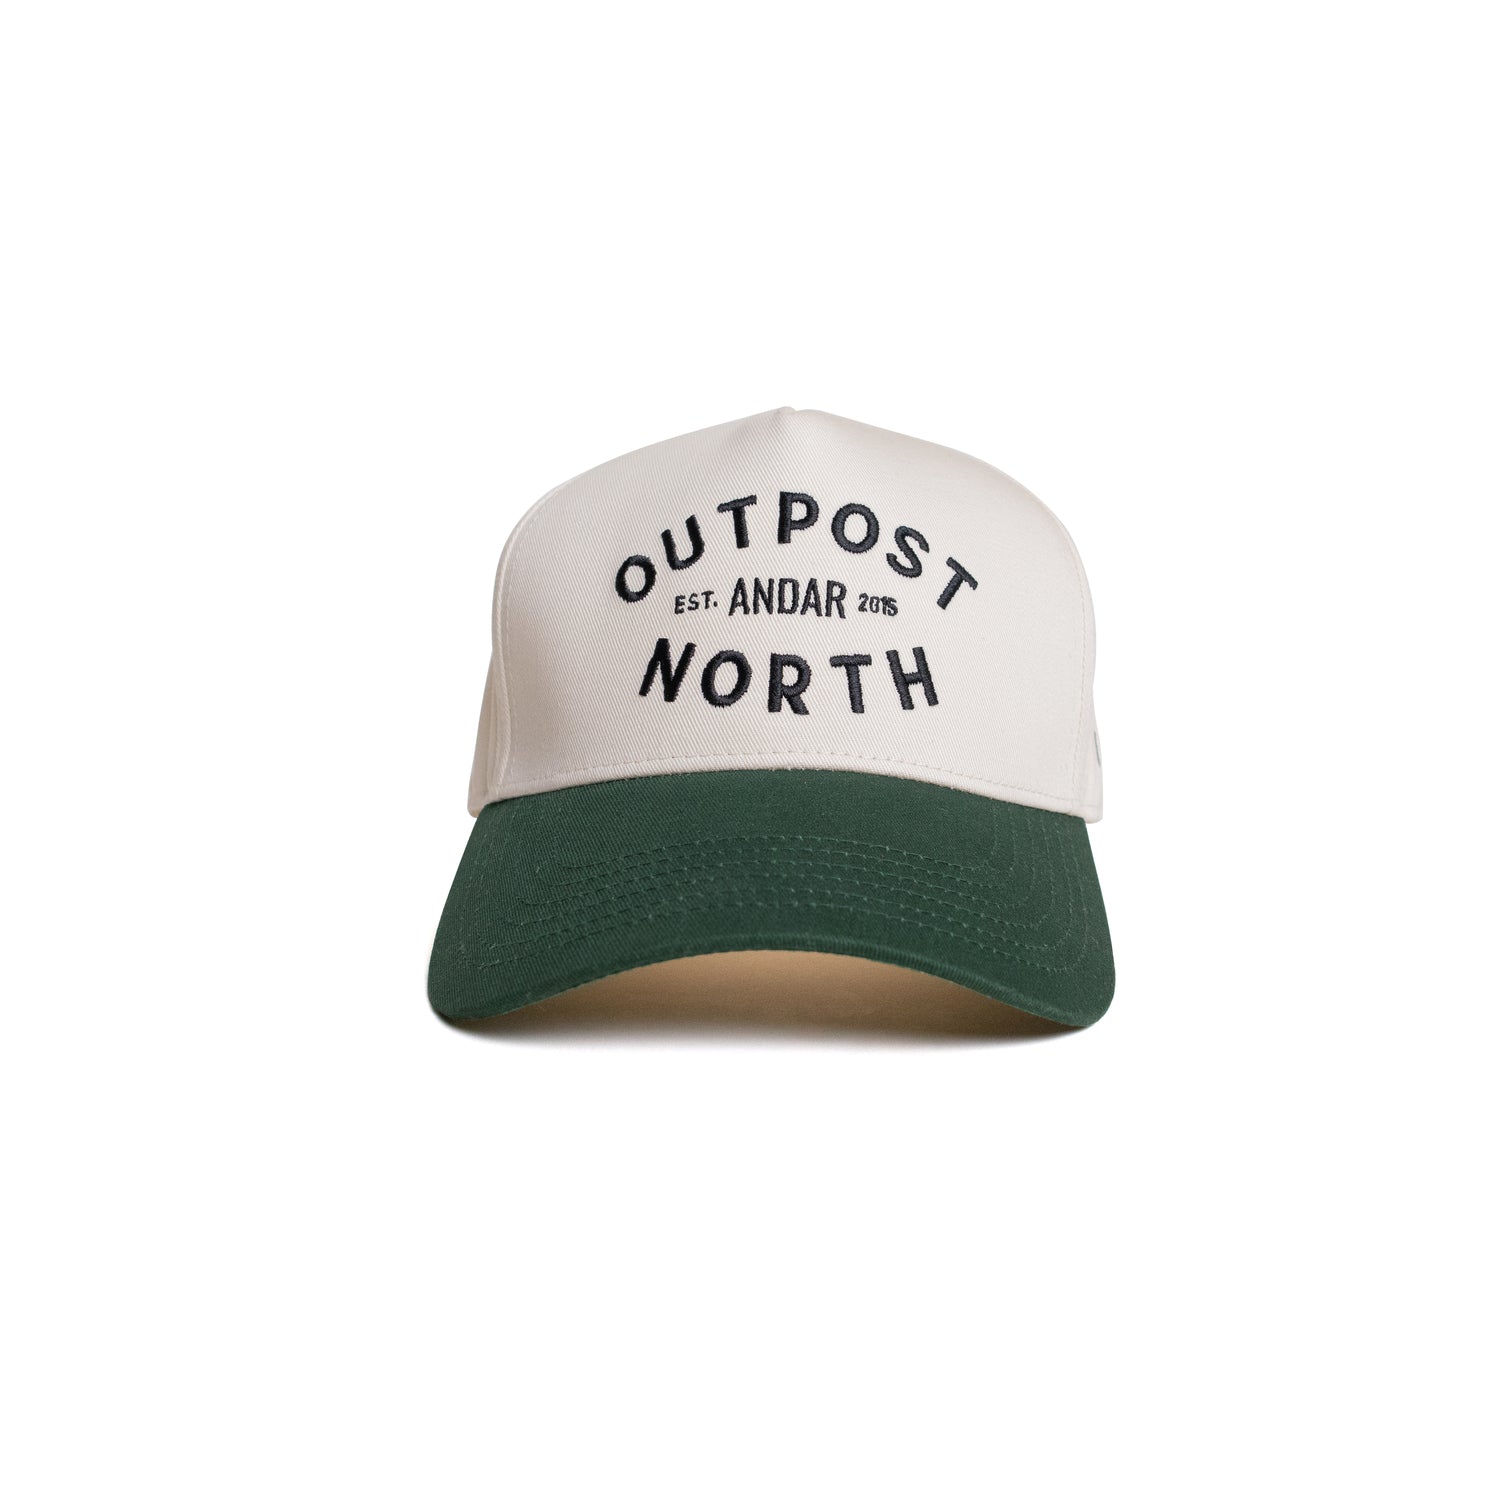 The Outpost North Hat